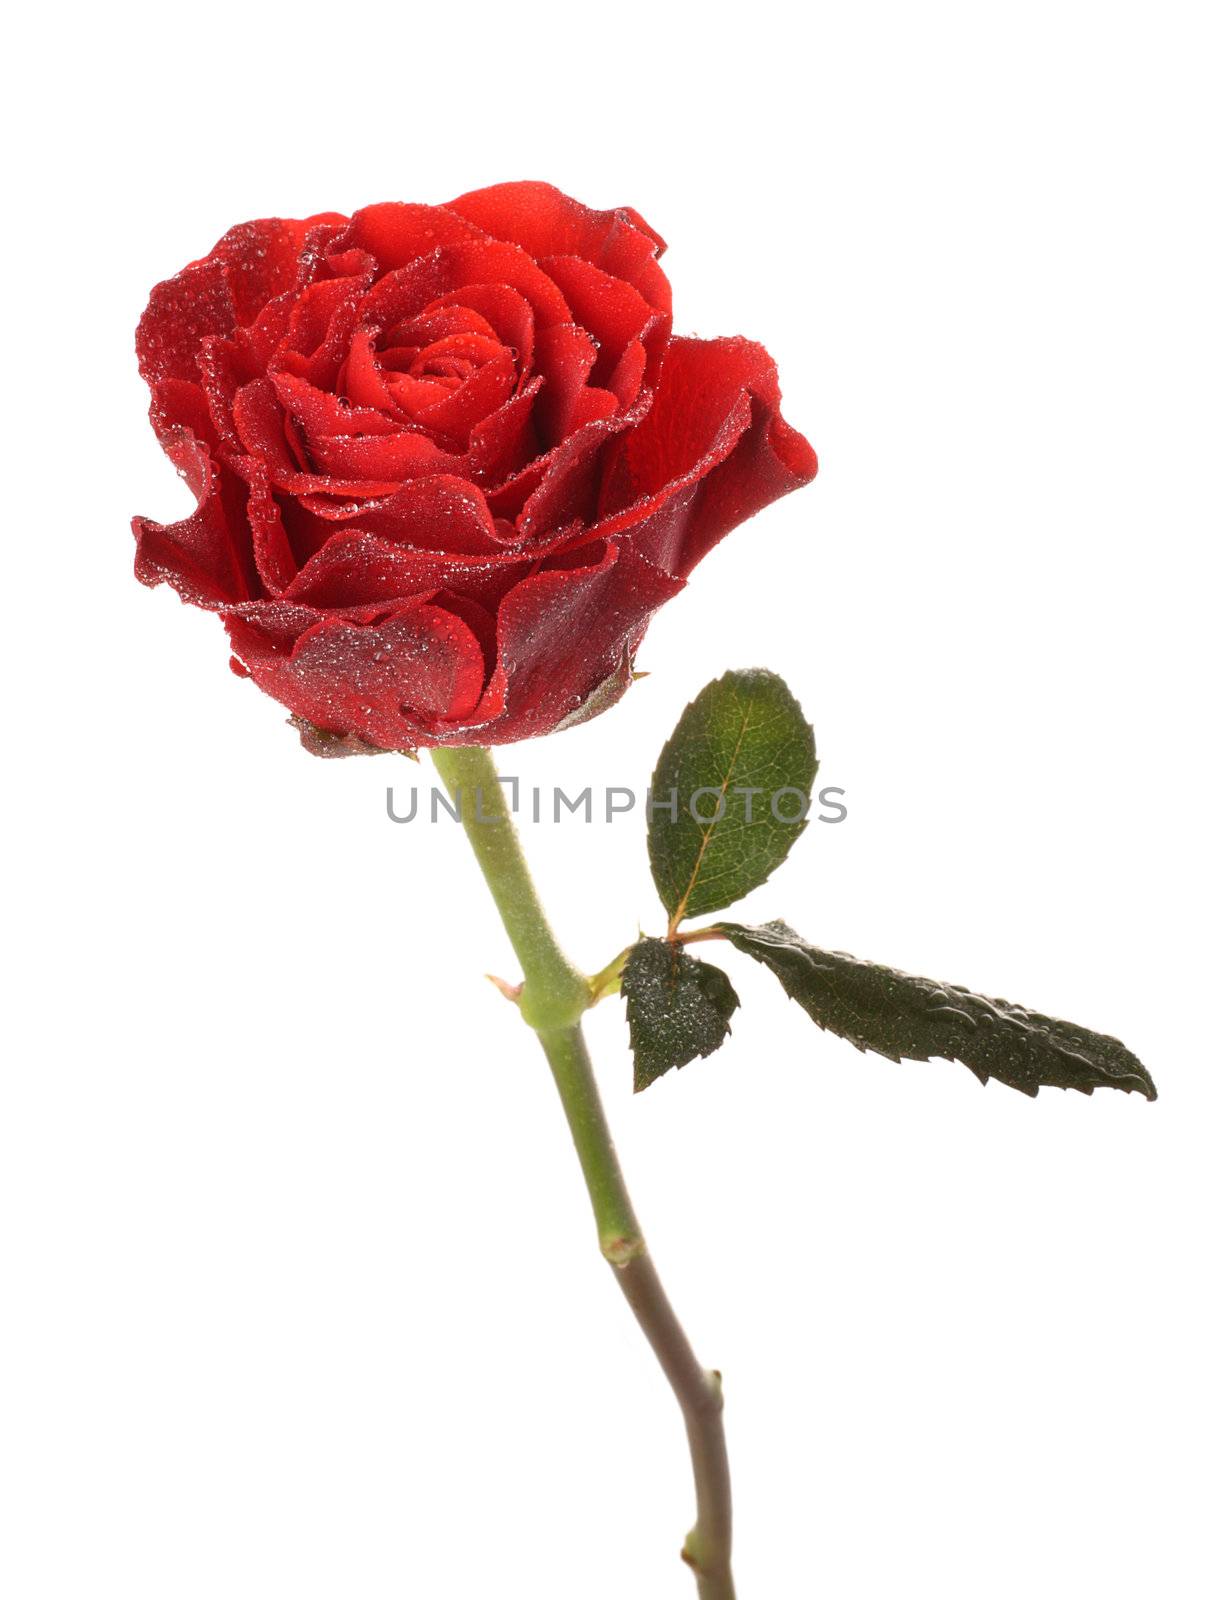 Red rose with drops of water on a white background